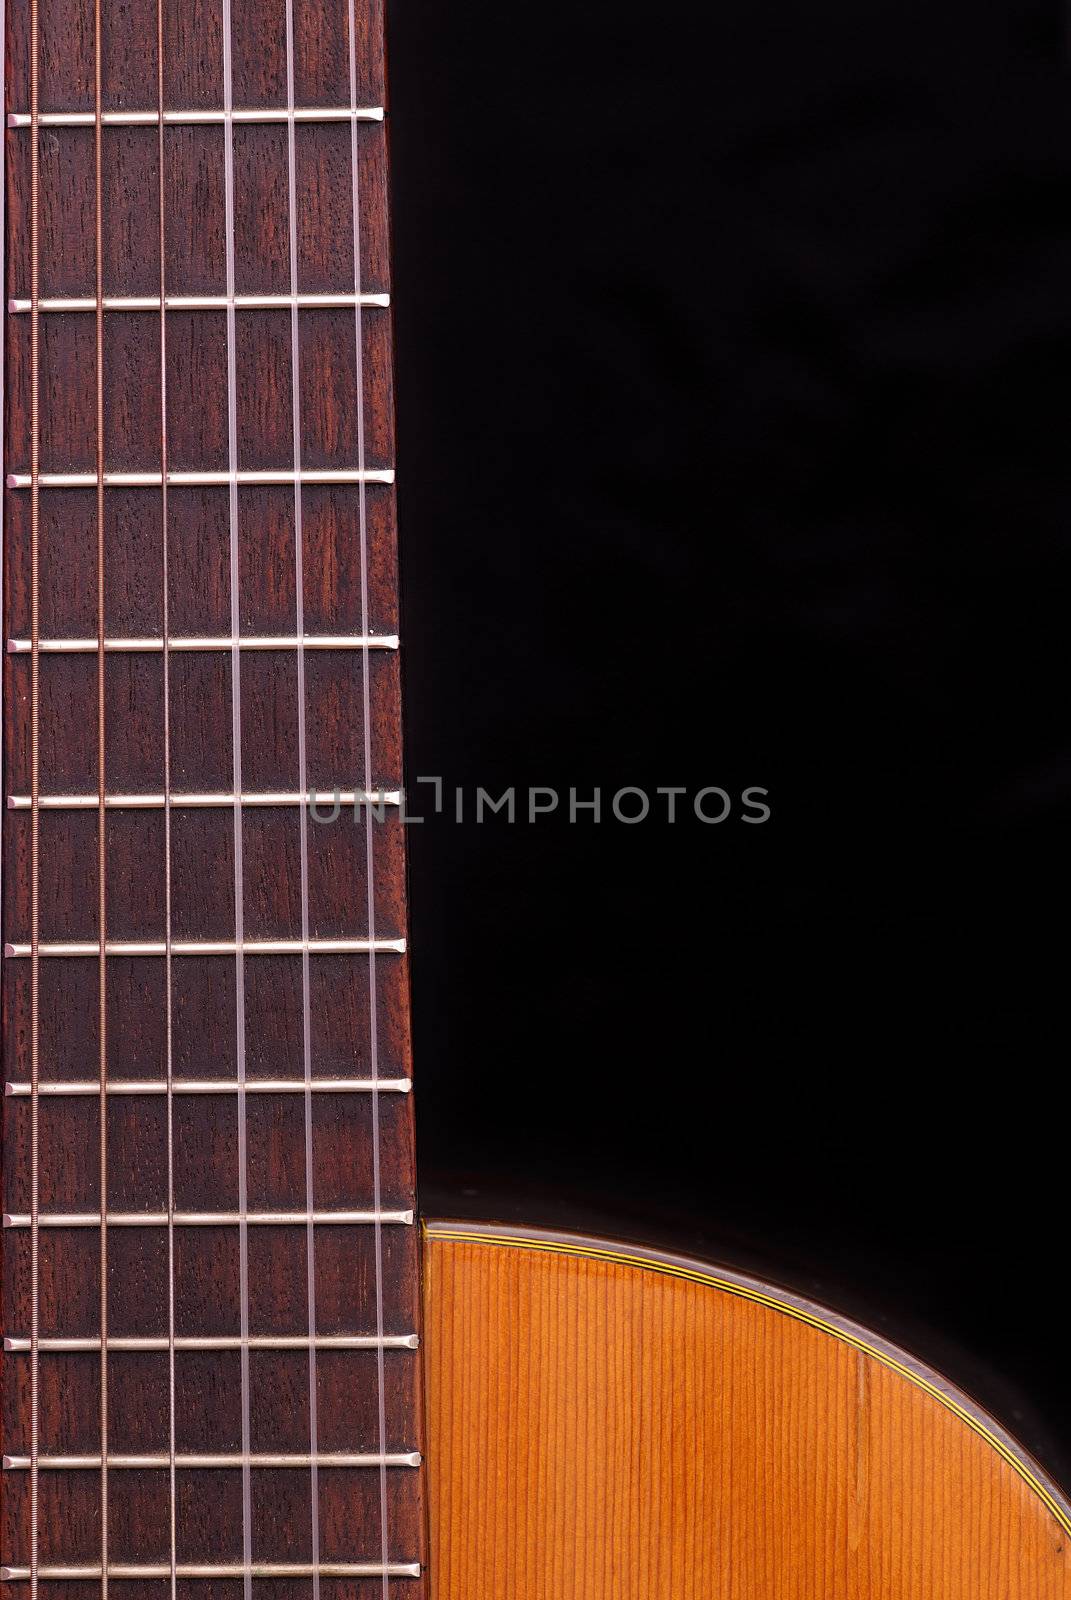 Detail of classic guitar fretboard (Spanish), against black background.